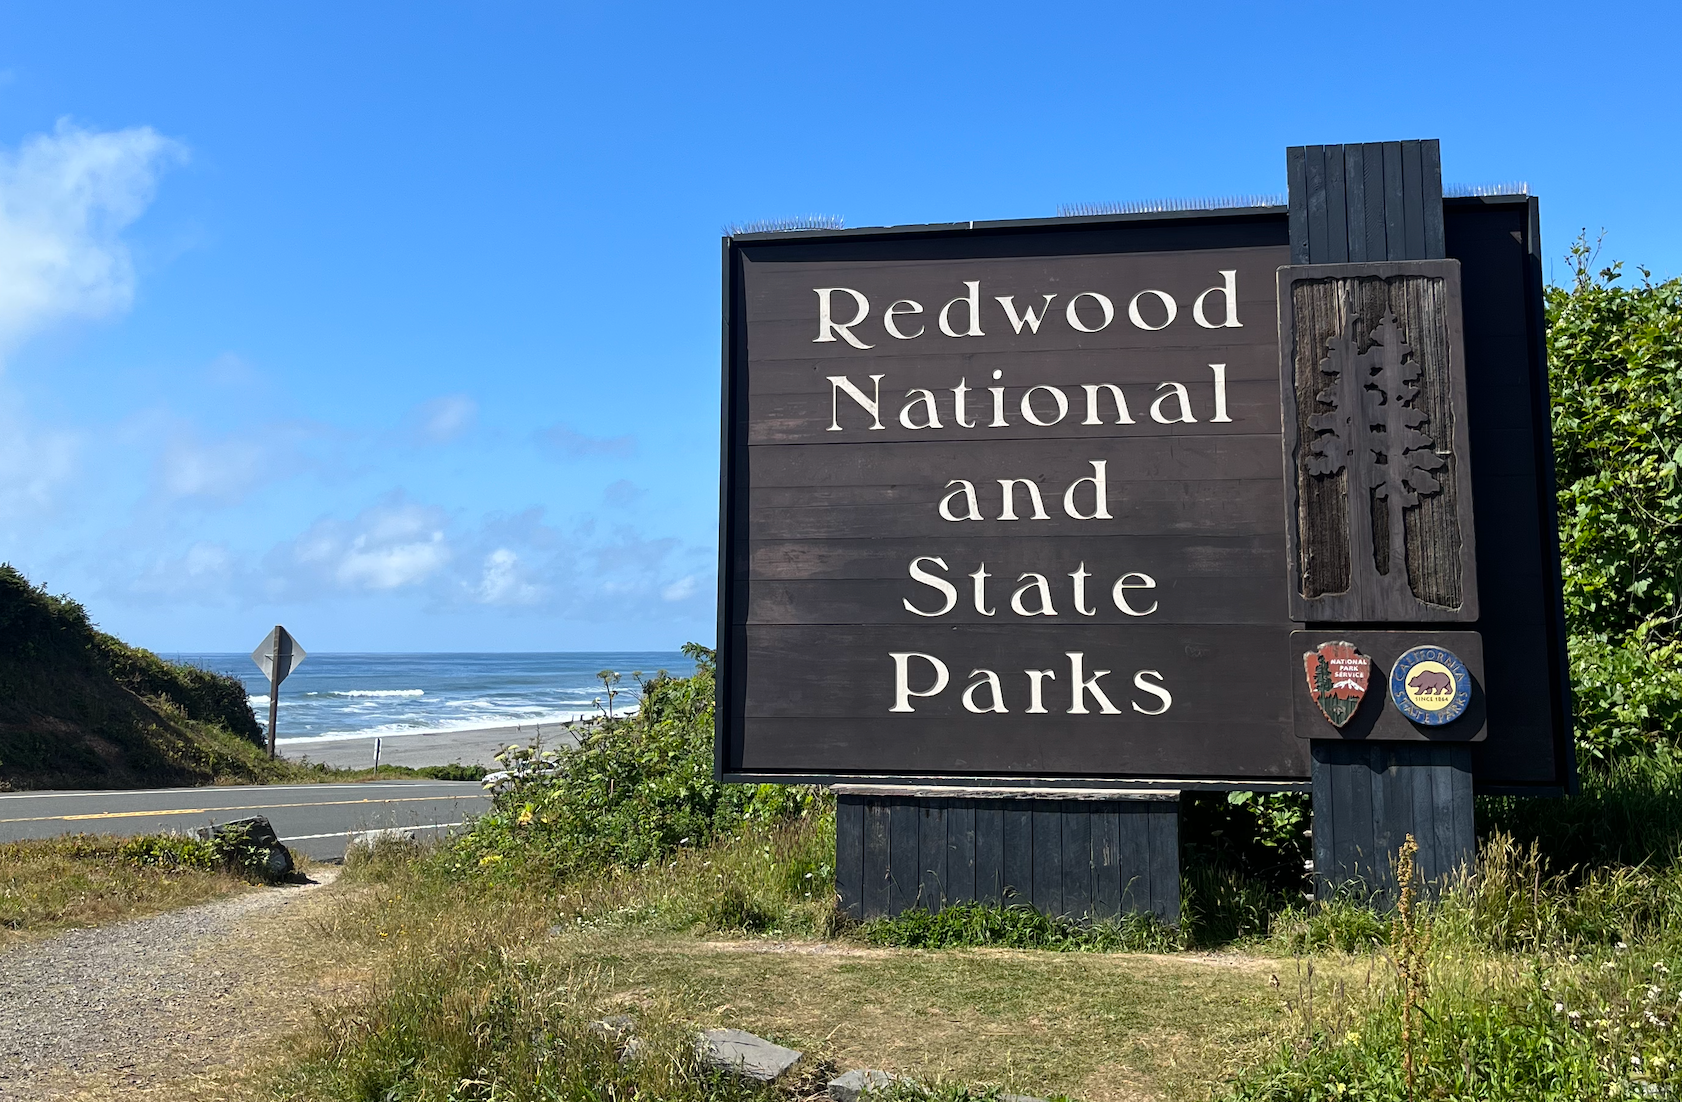 ADG Explores Redwood National and State Parks!